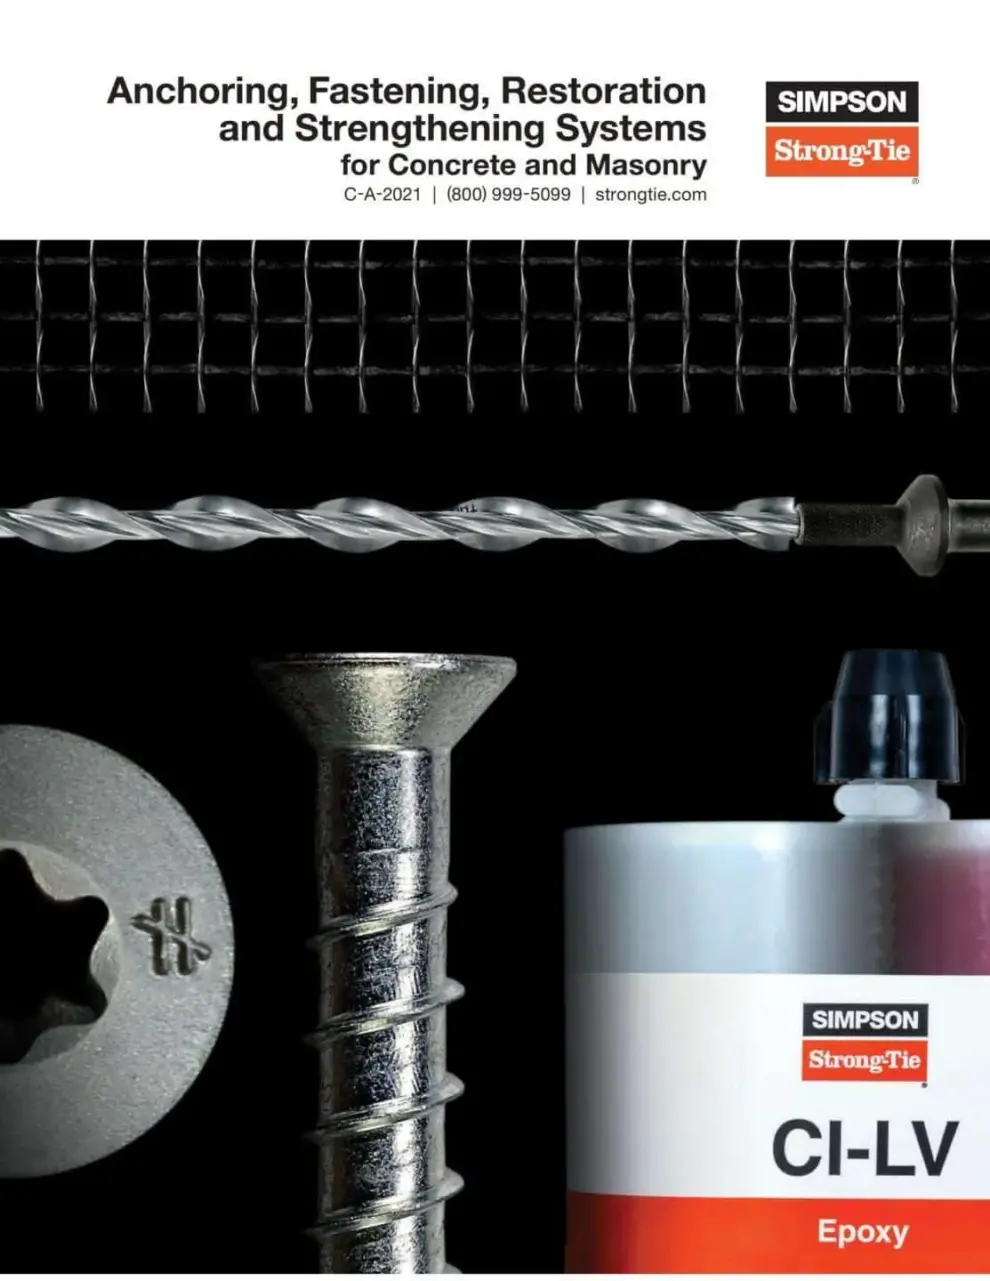 Simpson Strong-Tie Releases 2021 Concrete Catalog with Updated Engineering and Design Tables, Code Listings, and a Quick Guide to Choosing Anchoring Products for Corrosive Environments